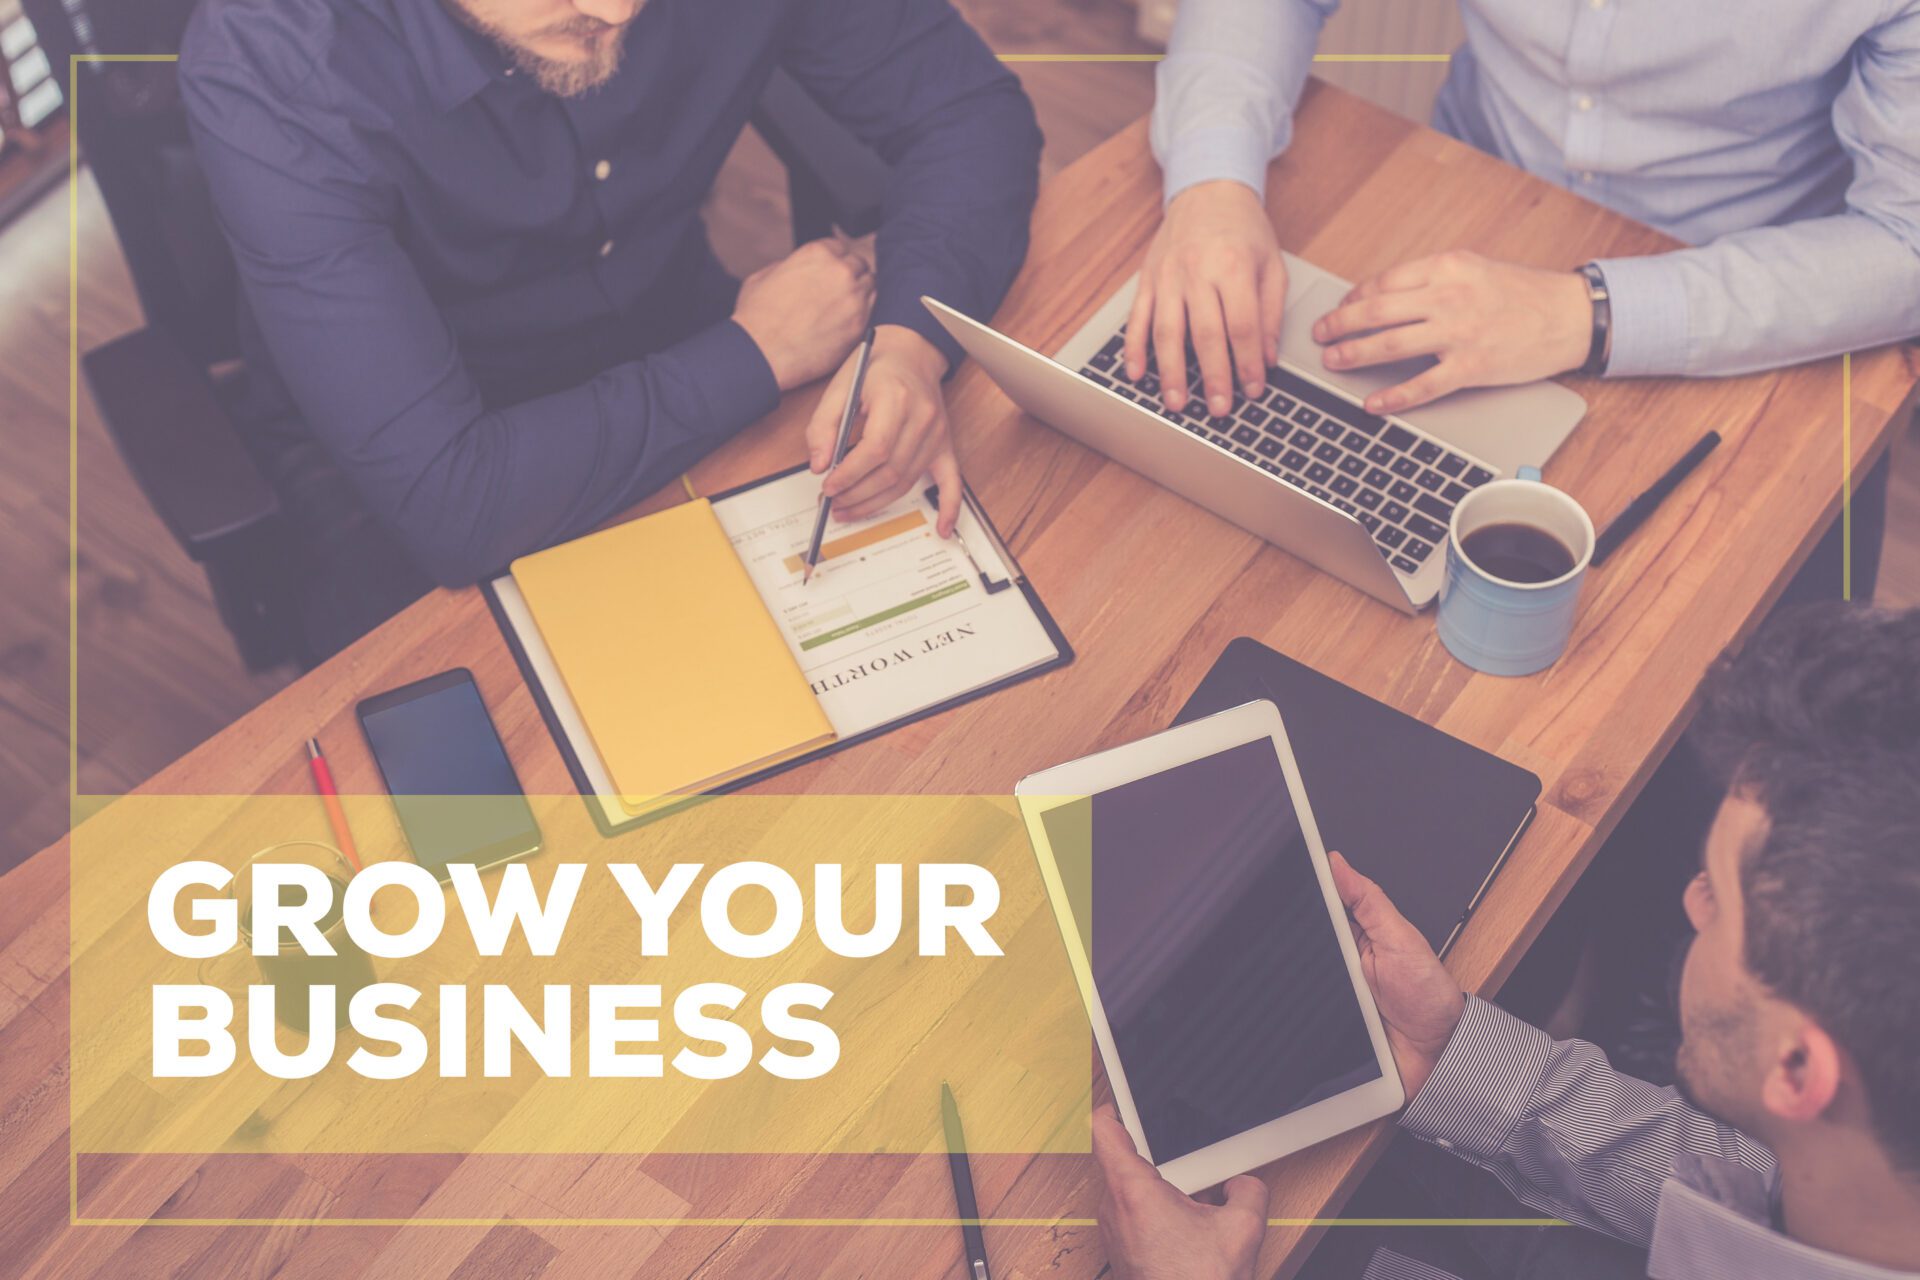 The phrase “Grow Your Business” is superimposed on an image of a marketing team at work.